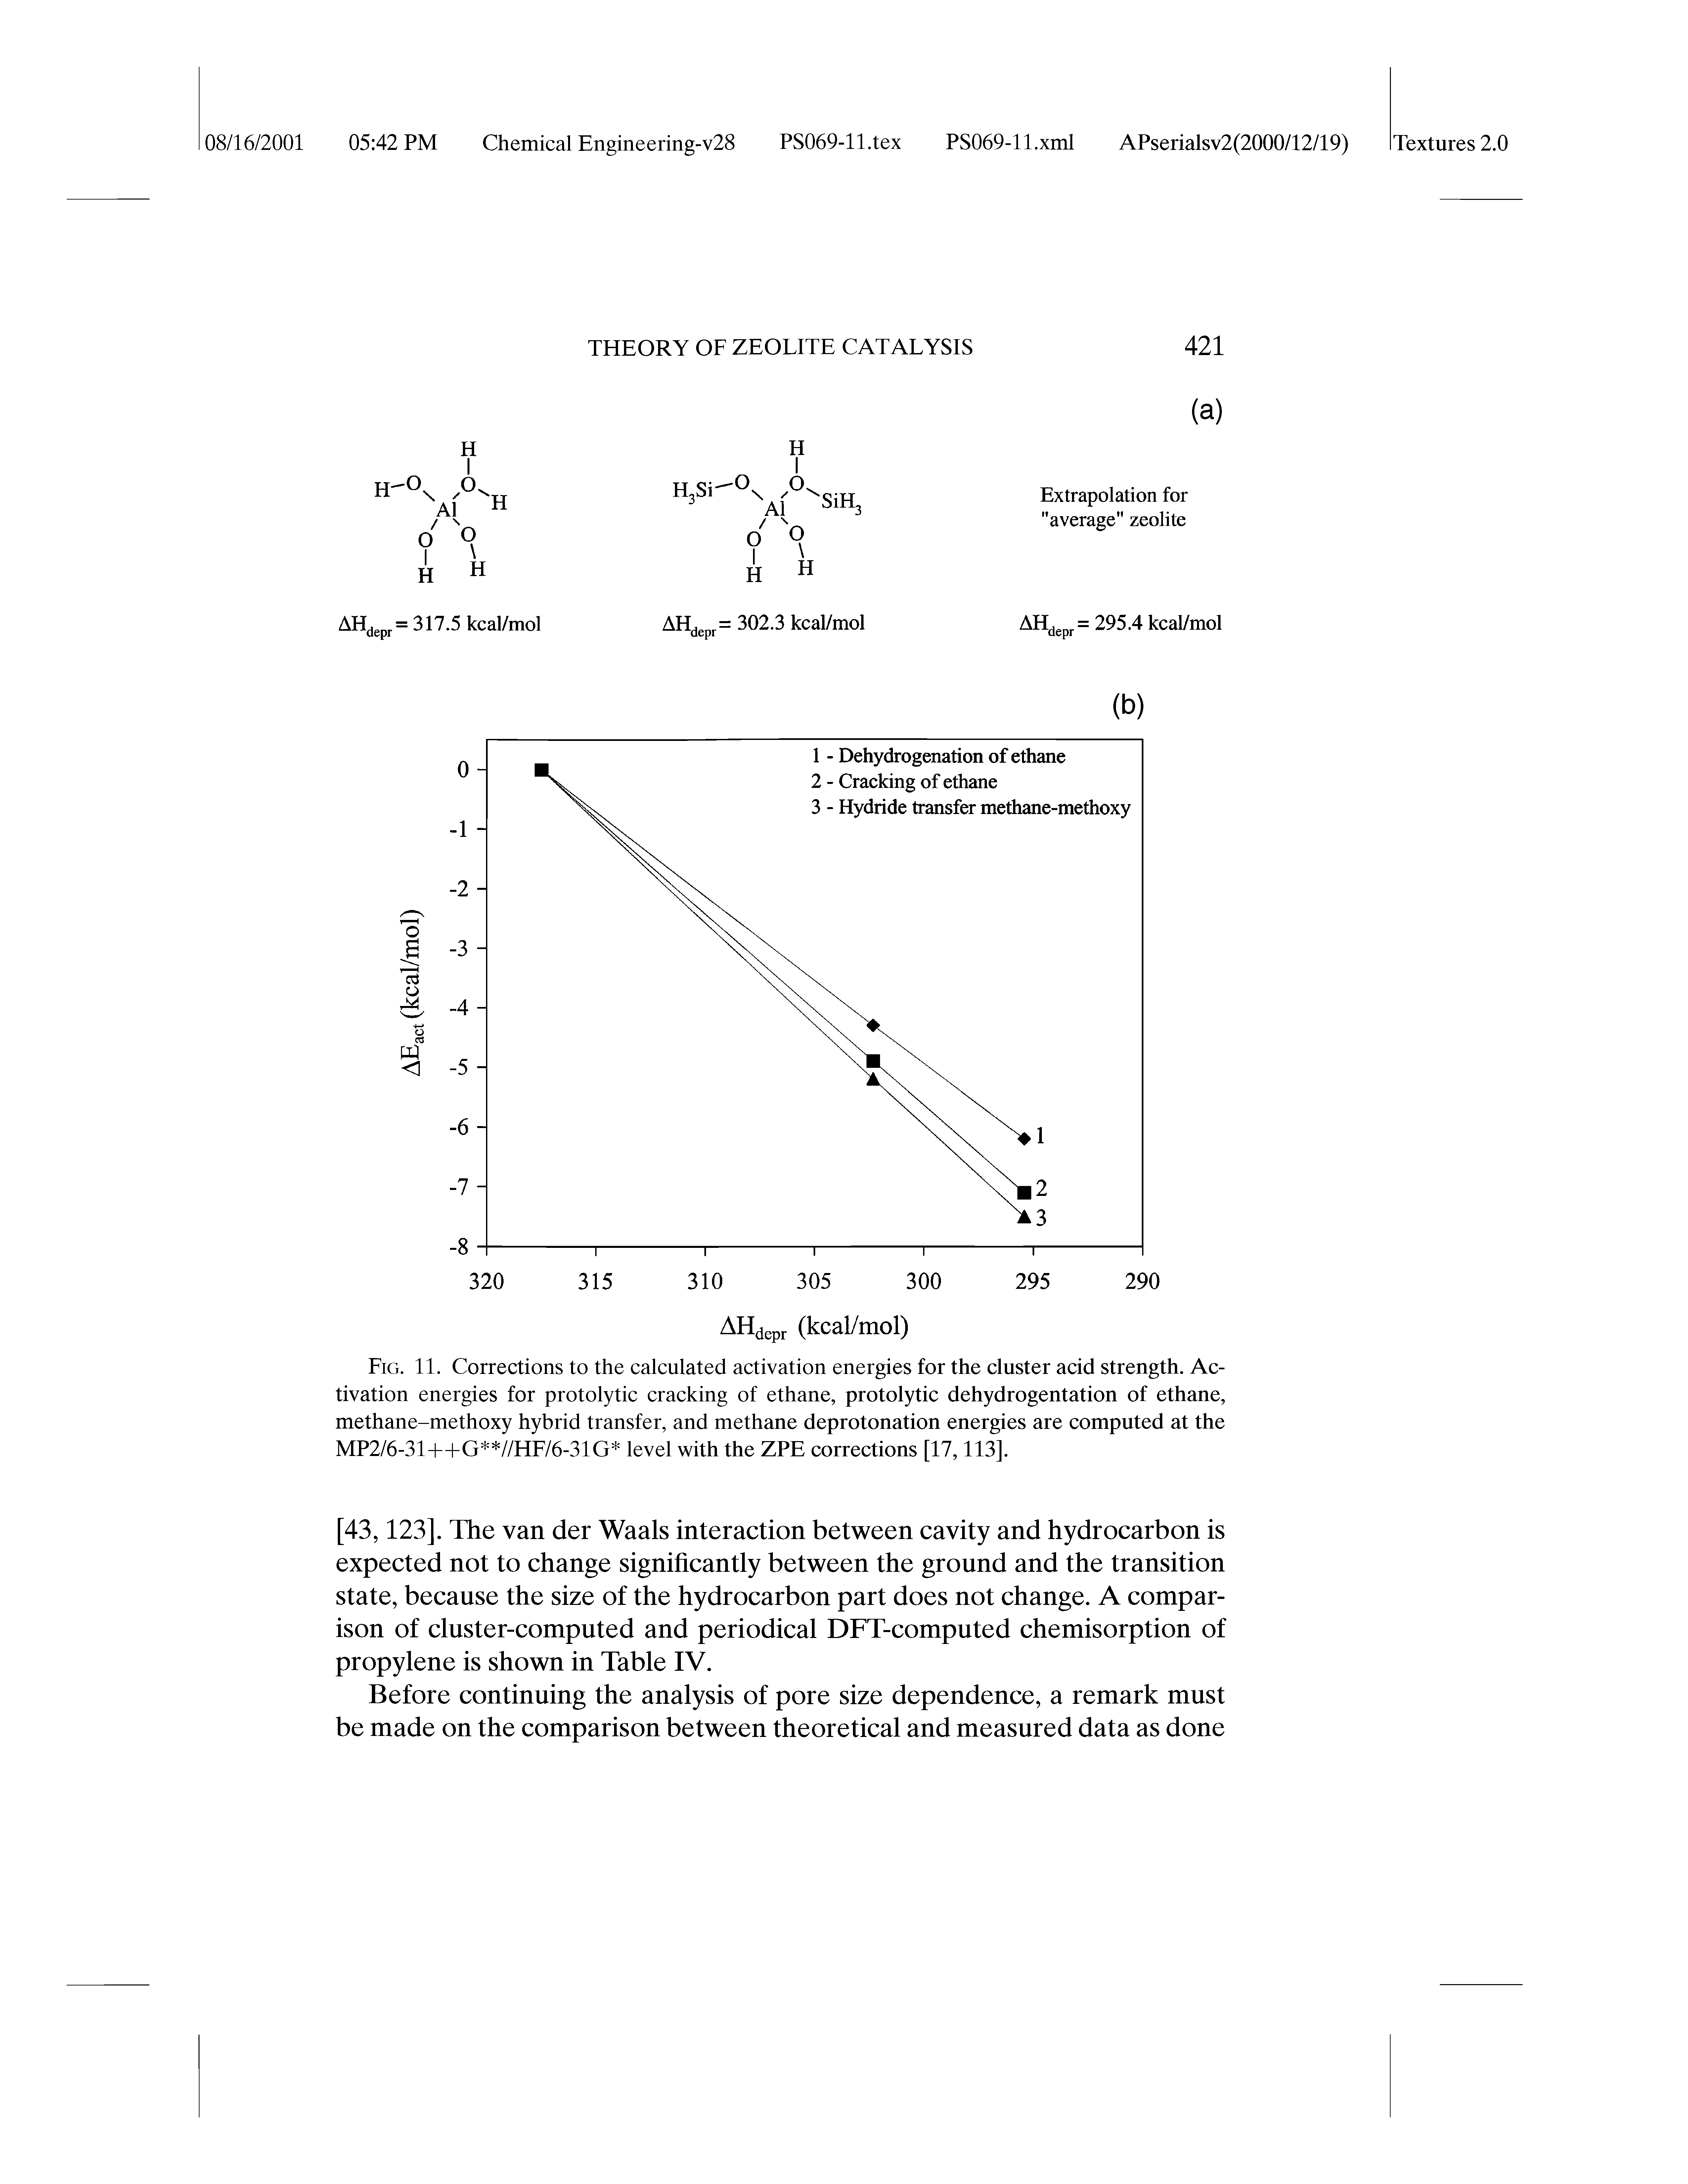 Fig. 11. Corrections to the calculated activation energies for the cluster acid strength. Activation energies for protolytic cracking of ethane, protolytic dehydrogentation of ethane, methane-methoxy hybrid transfer, and methane deprotonation energies are computed at the MP2/6-31++G //HF/6-31G level with the ZPE corrections [17,113].